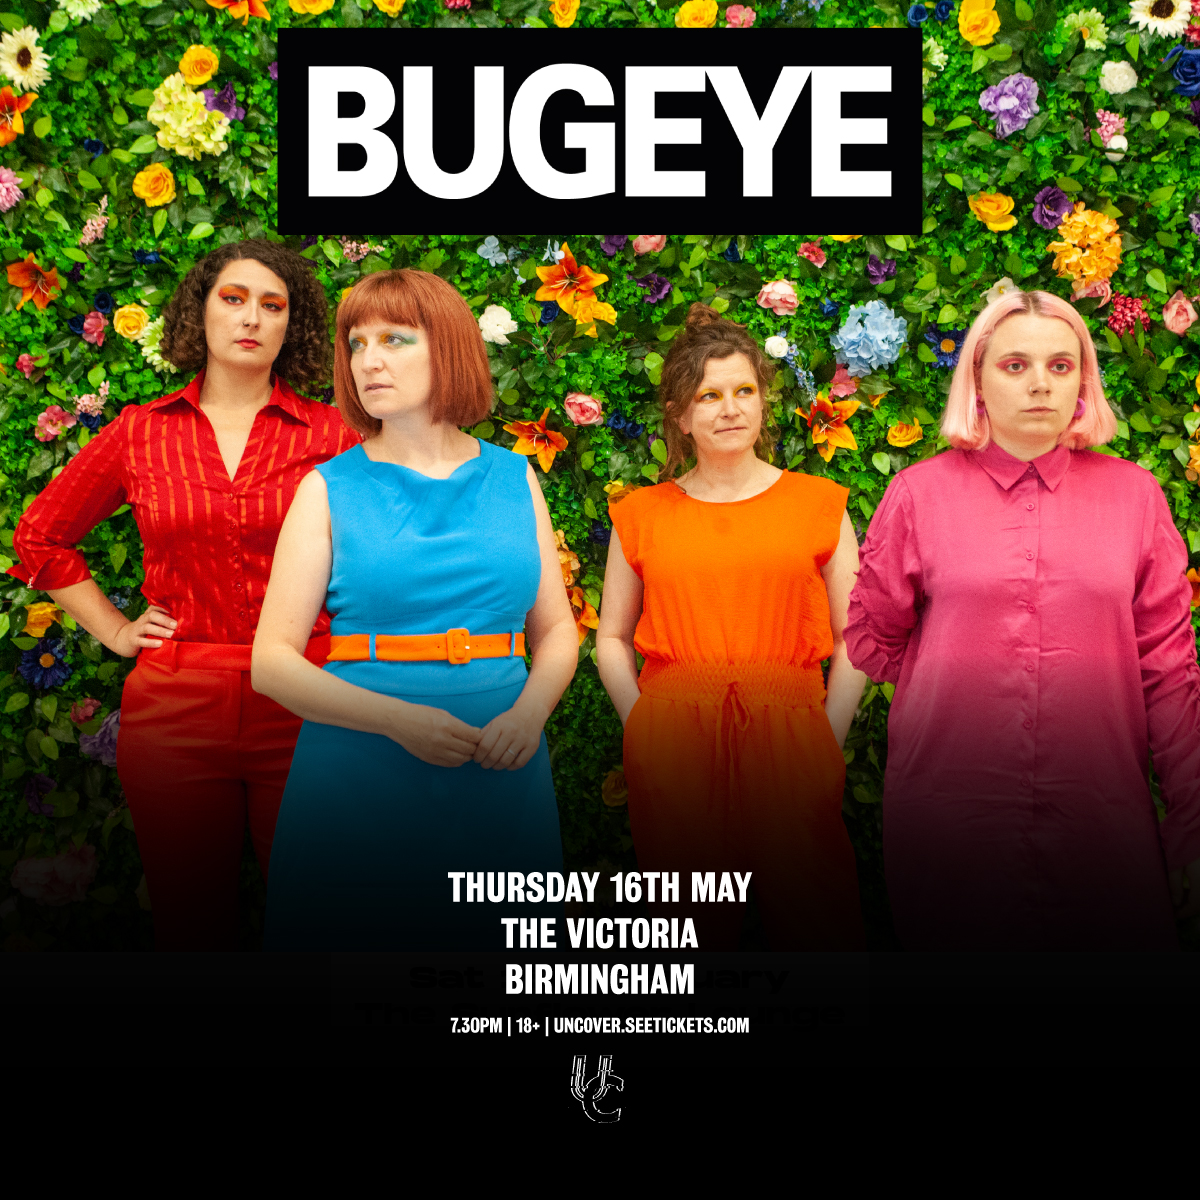 ONE MONTH TO GO 💙 Sequin-drenched all-female four-piece @Bugeyeband headline @TheVictoria, Birmingham, on Thursday, 16th May 🎉 Tickets on sale now: bit.ly/4bjEsqR